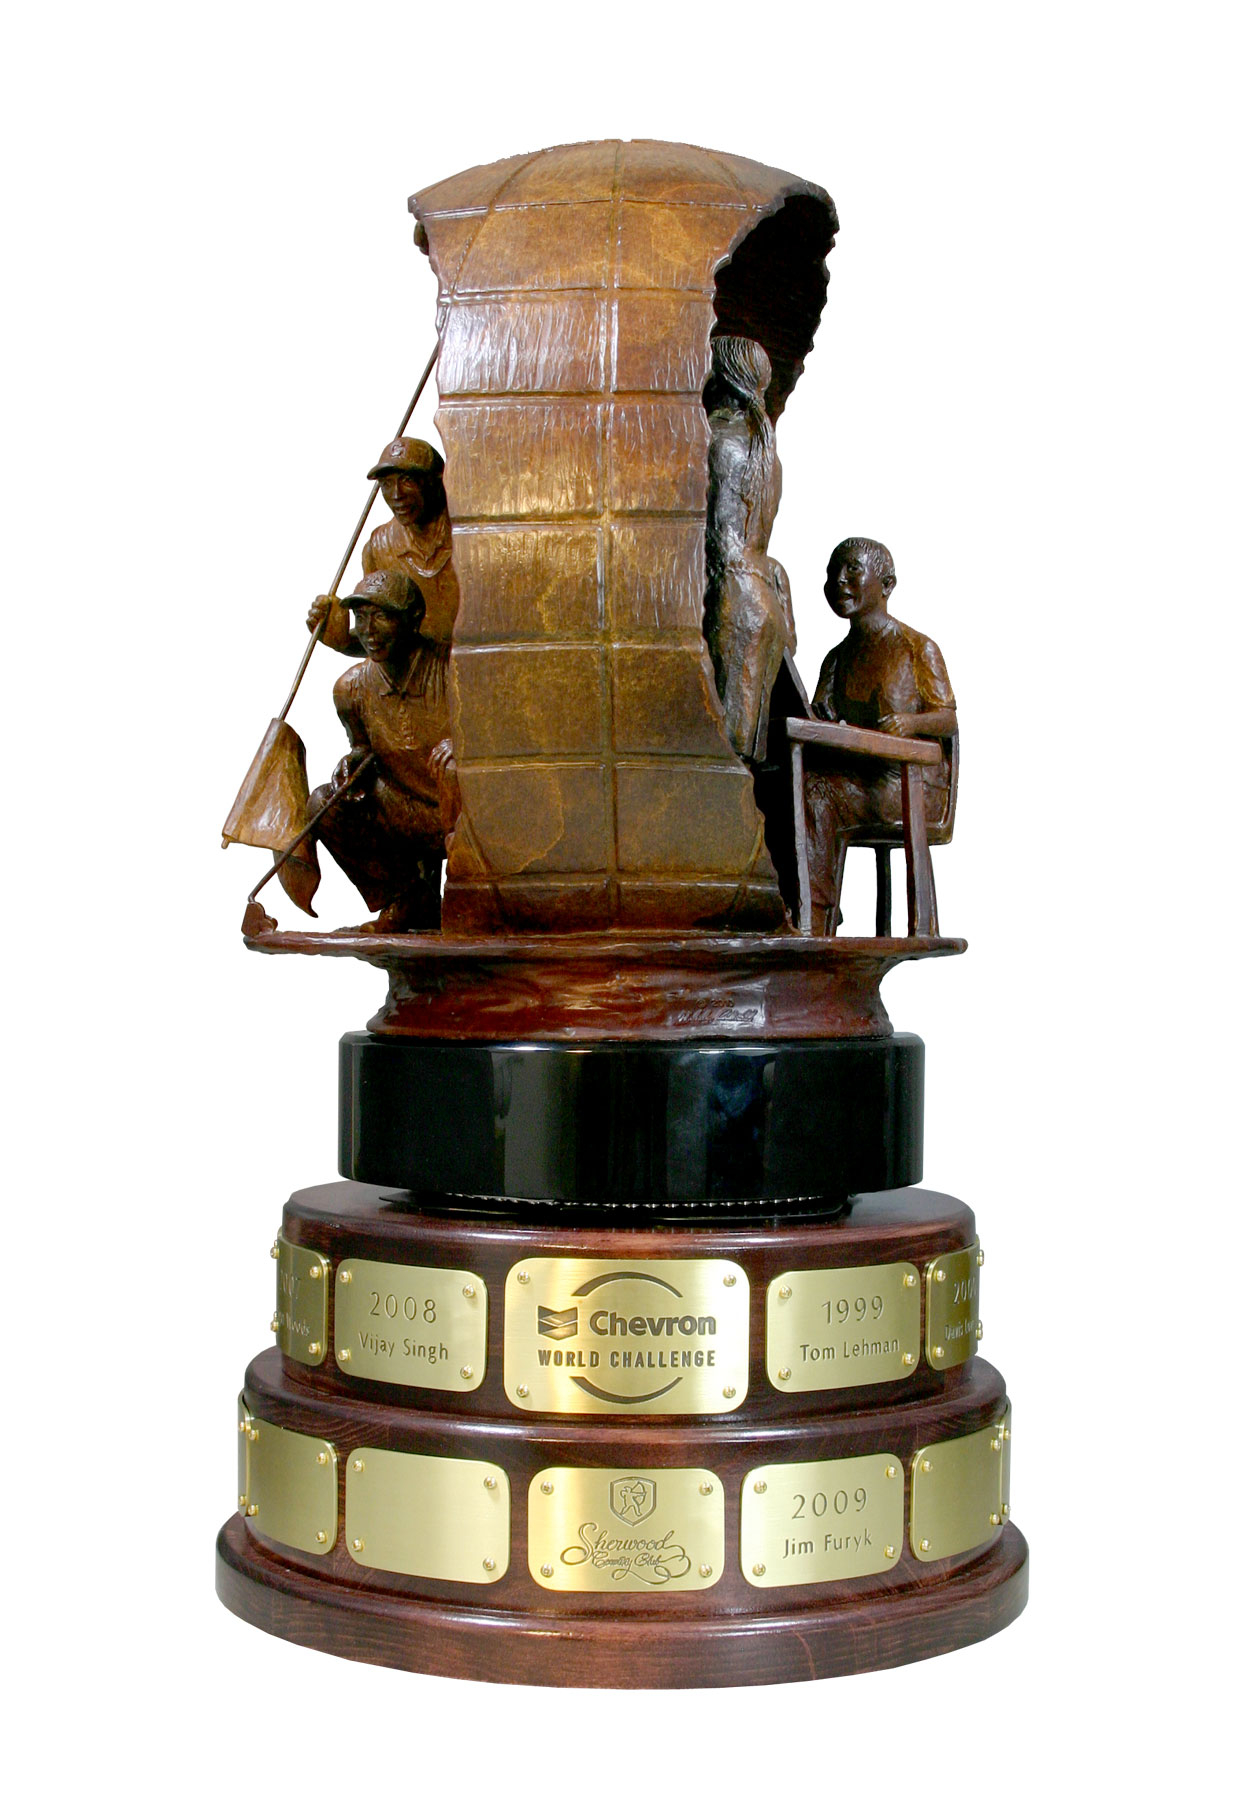 Chevron World Challenge trophy made by Malcolm DeMille- Side View